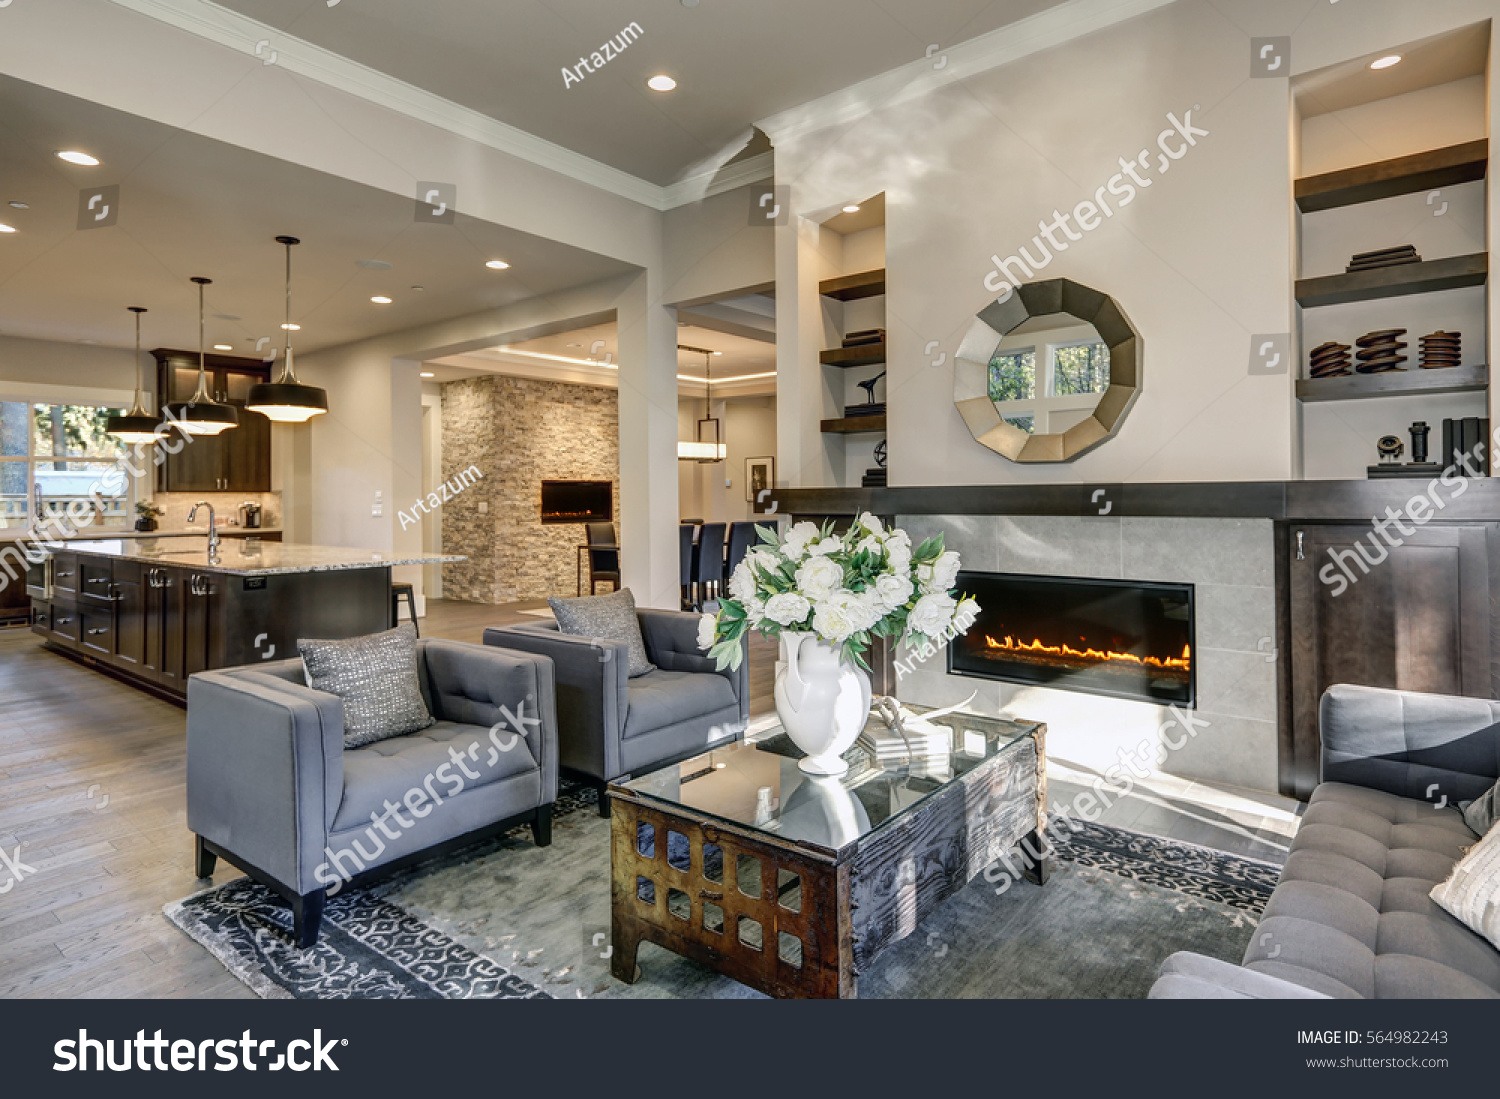 Chic living room filled with built-in cabinets flanking round mirror atop grey tile fireplace, tufted sofa facing two armchairs and window wall overlooking  lush outdoors. Northwest, USA #564982243